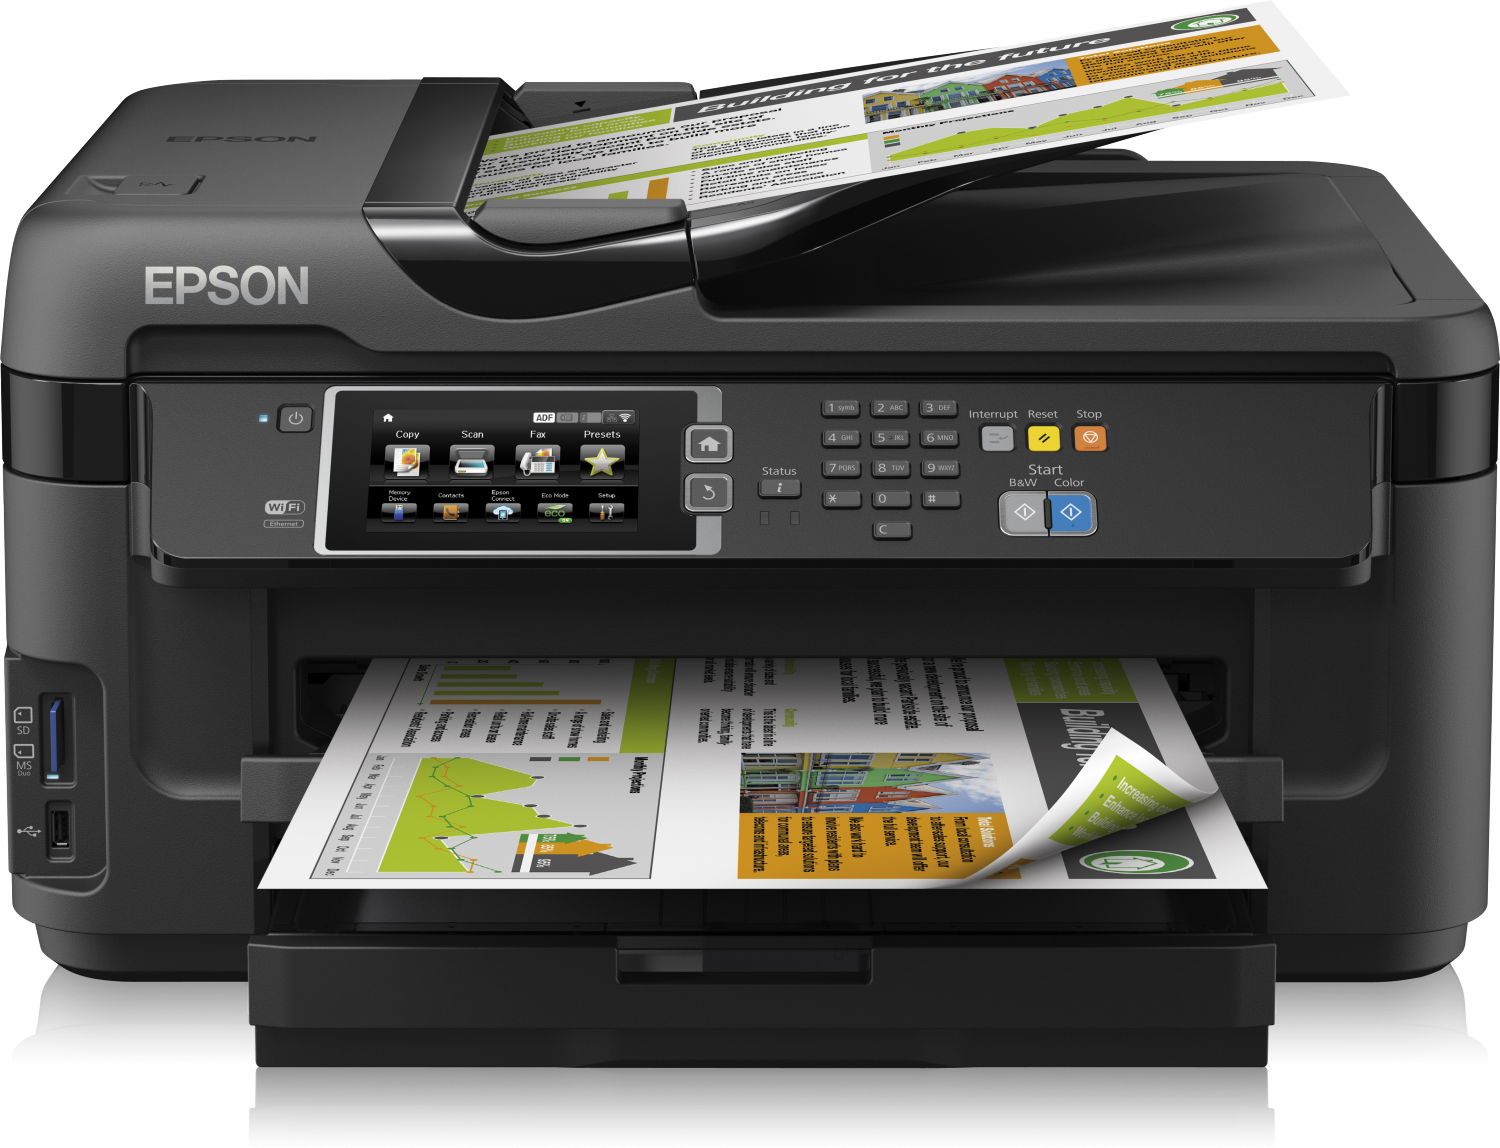 Epson WF-7610 Driver Linux Mint 18 How-to Download & Install - Featured